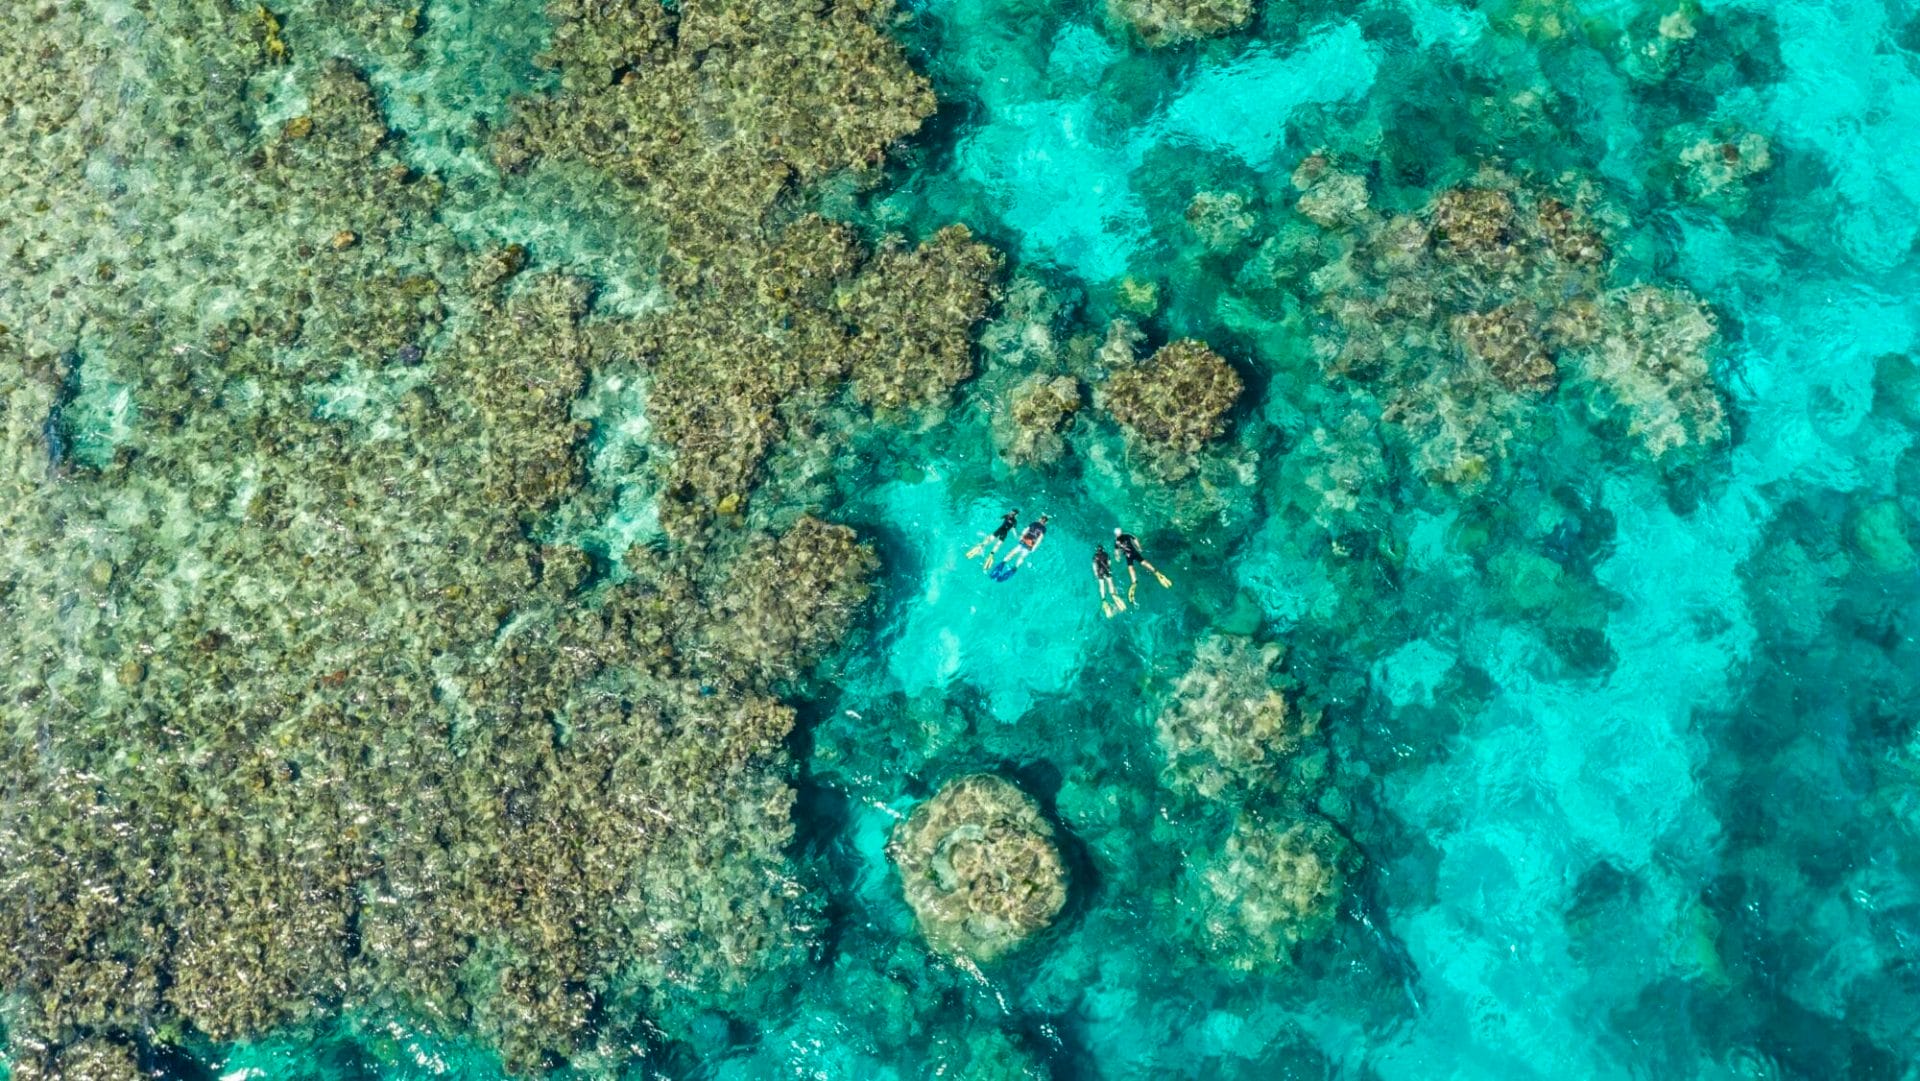 Aerial view of guests snorkelling amonst the coral formations at Agincourt Reef